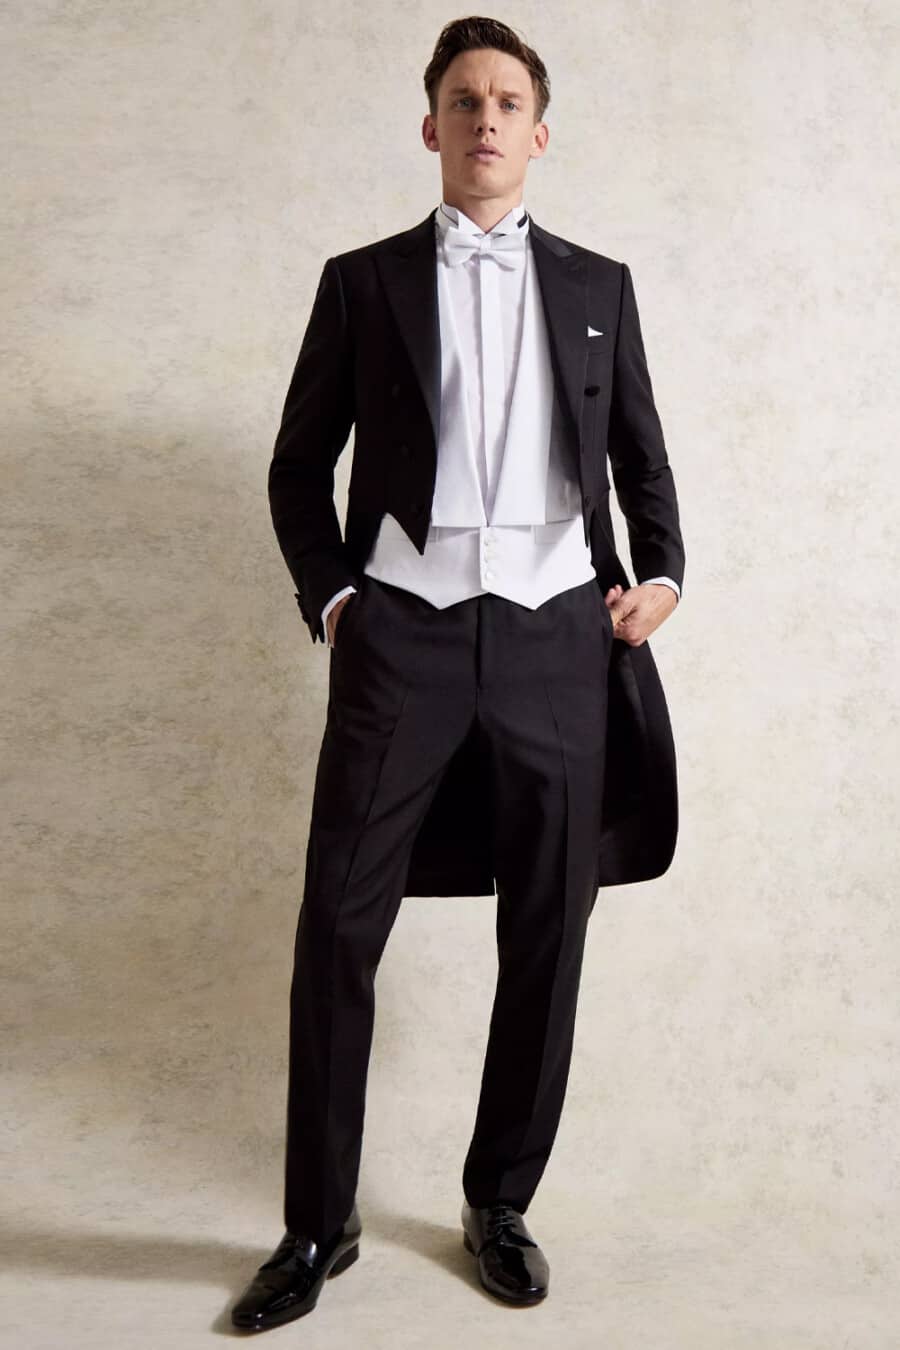 White Tie Wedding Guest Men Outfit 3 900x1350 